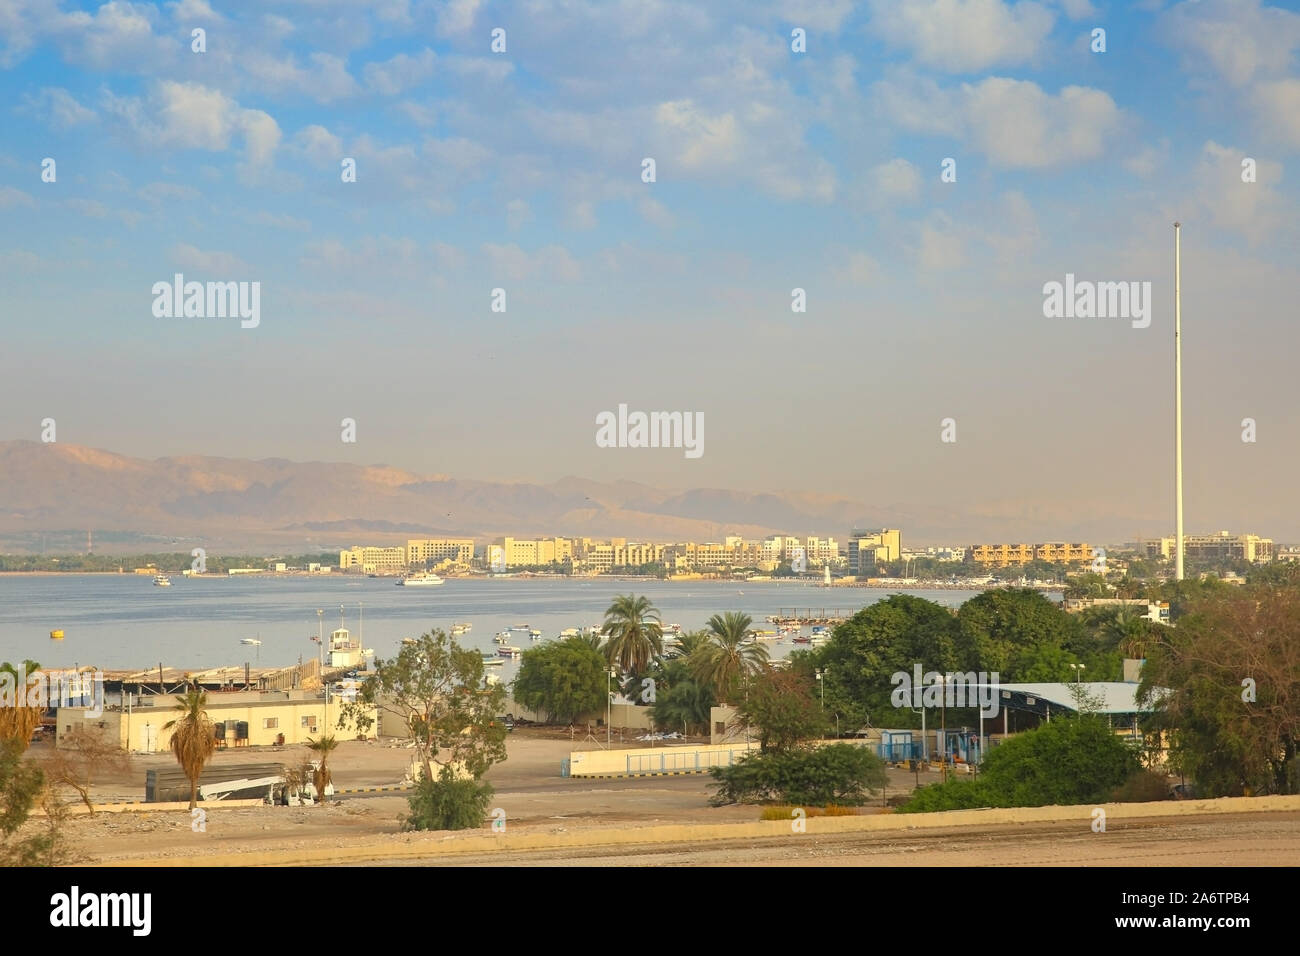 View of the Port City of Aqaba, Jordan. Buildings along the coastline with mountains in the background. Stock Photo